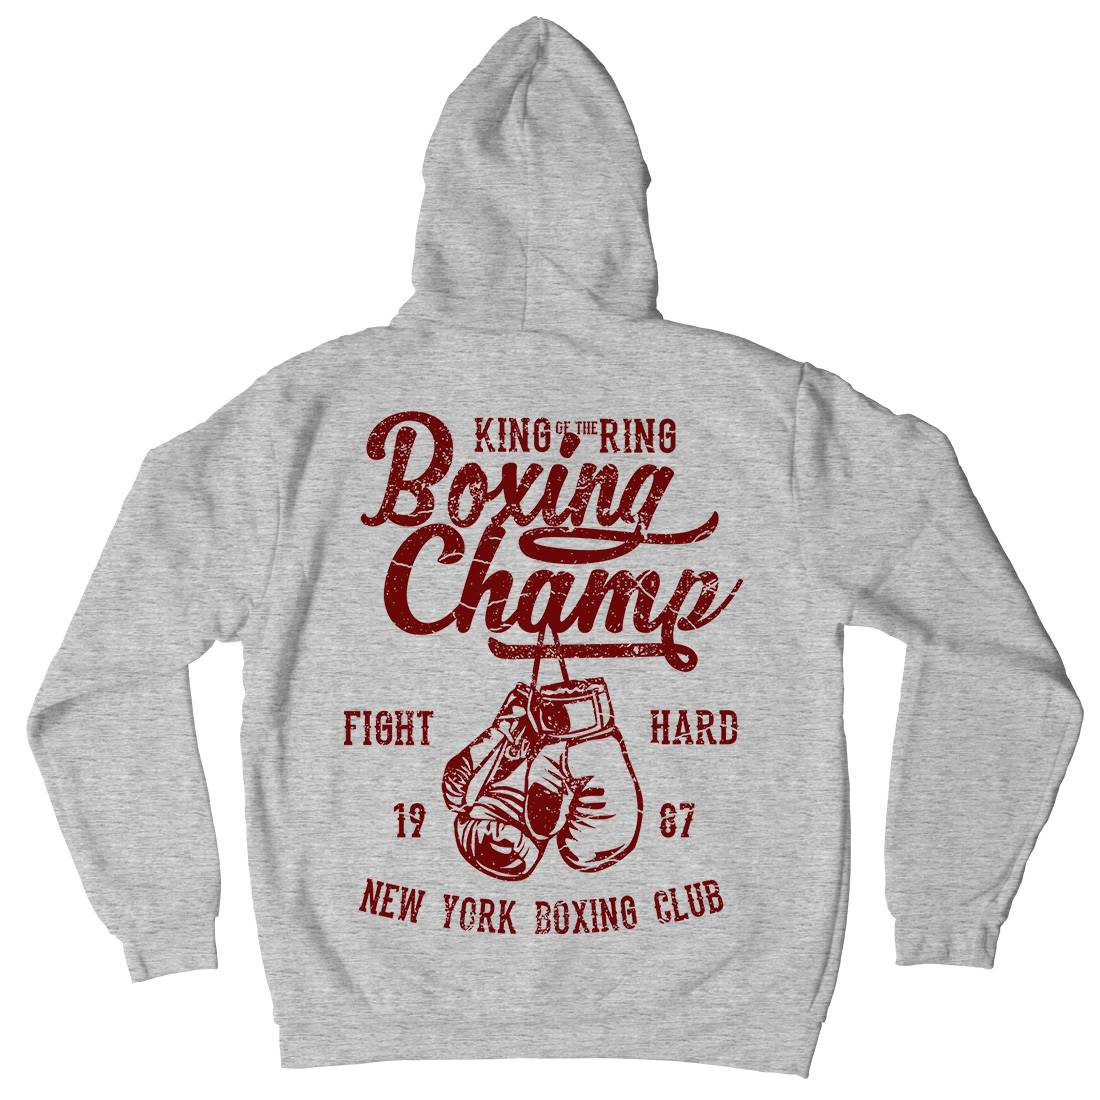 Boxing Champ Kids Crew Neck Hoodie Sport A021